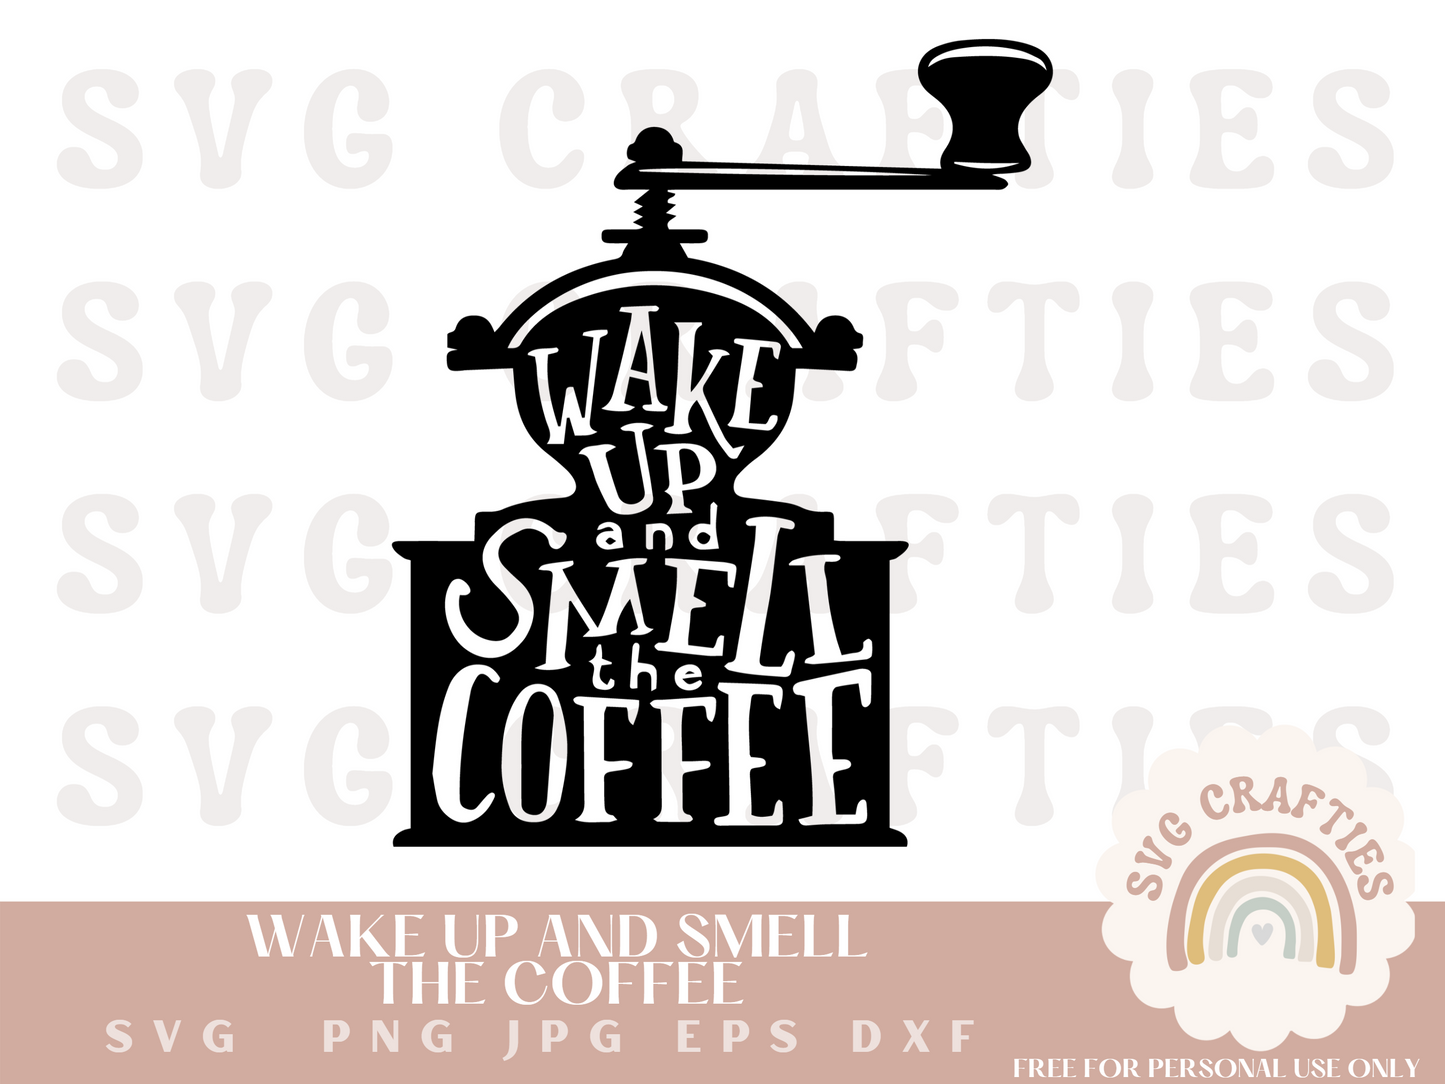 Wake Up and Smell the Coffee Free SVG Download